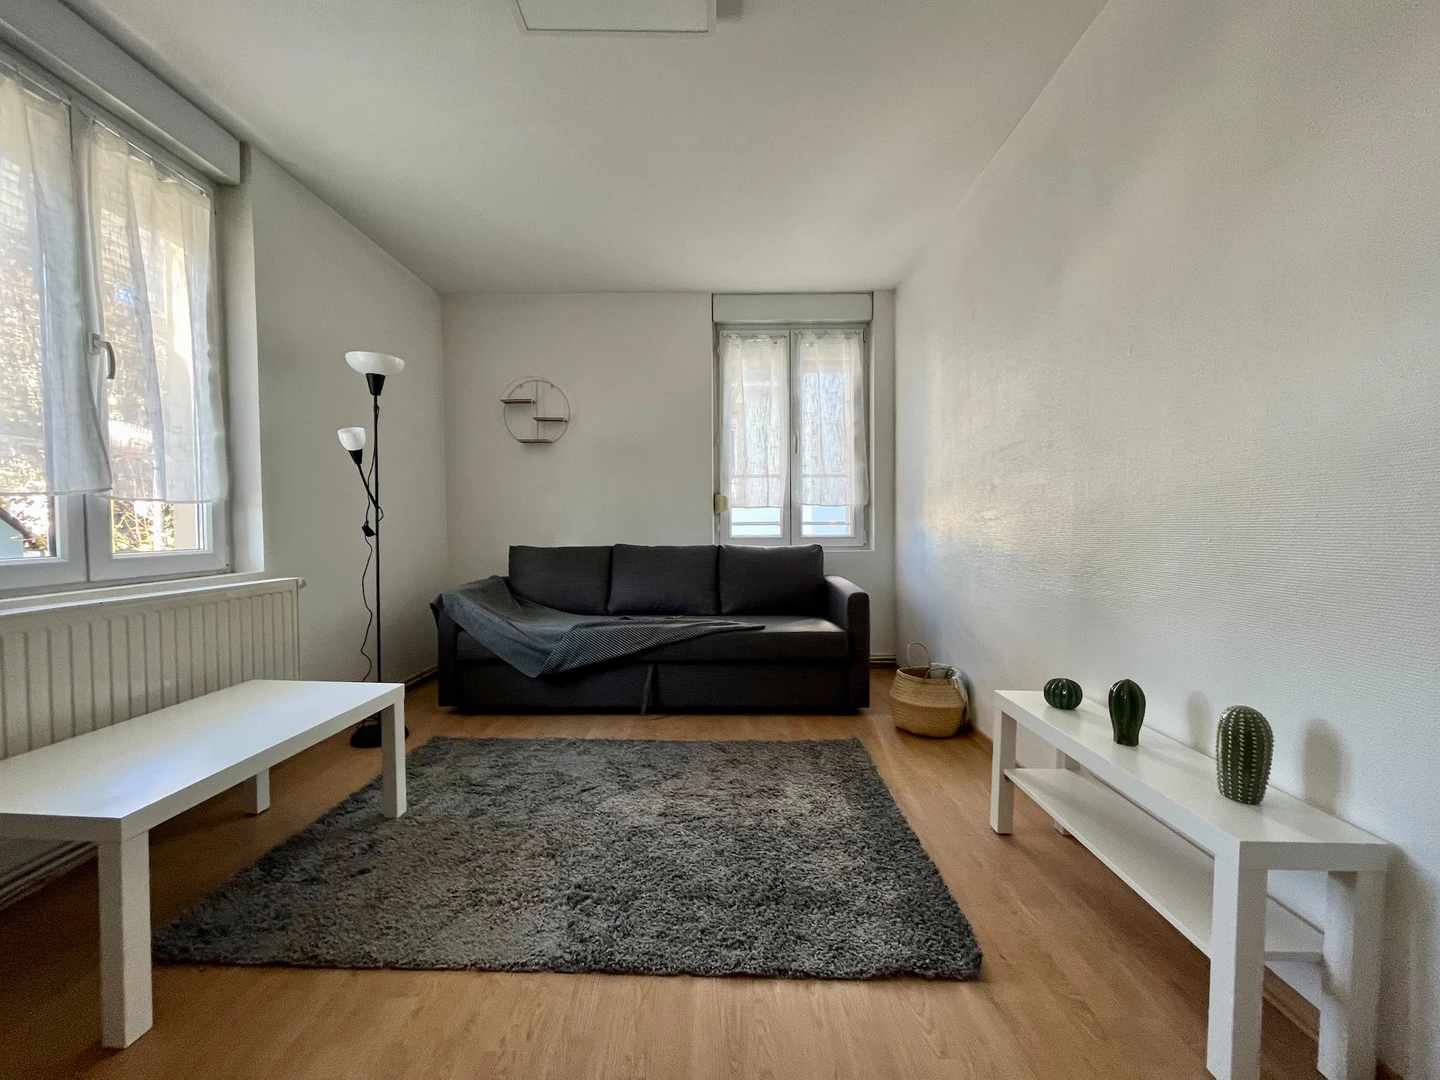 Accommodation in the centre of Strasbourg